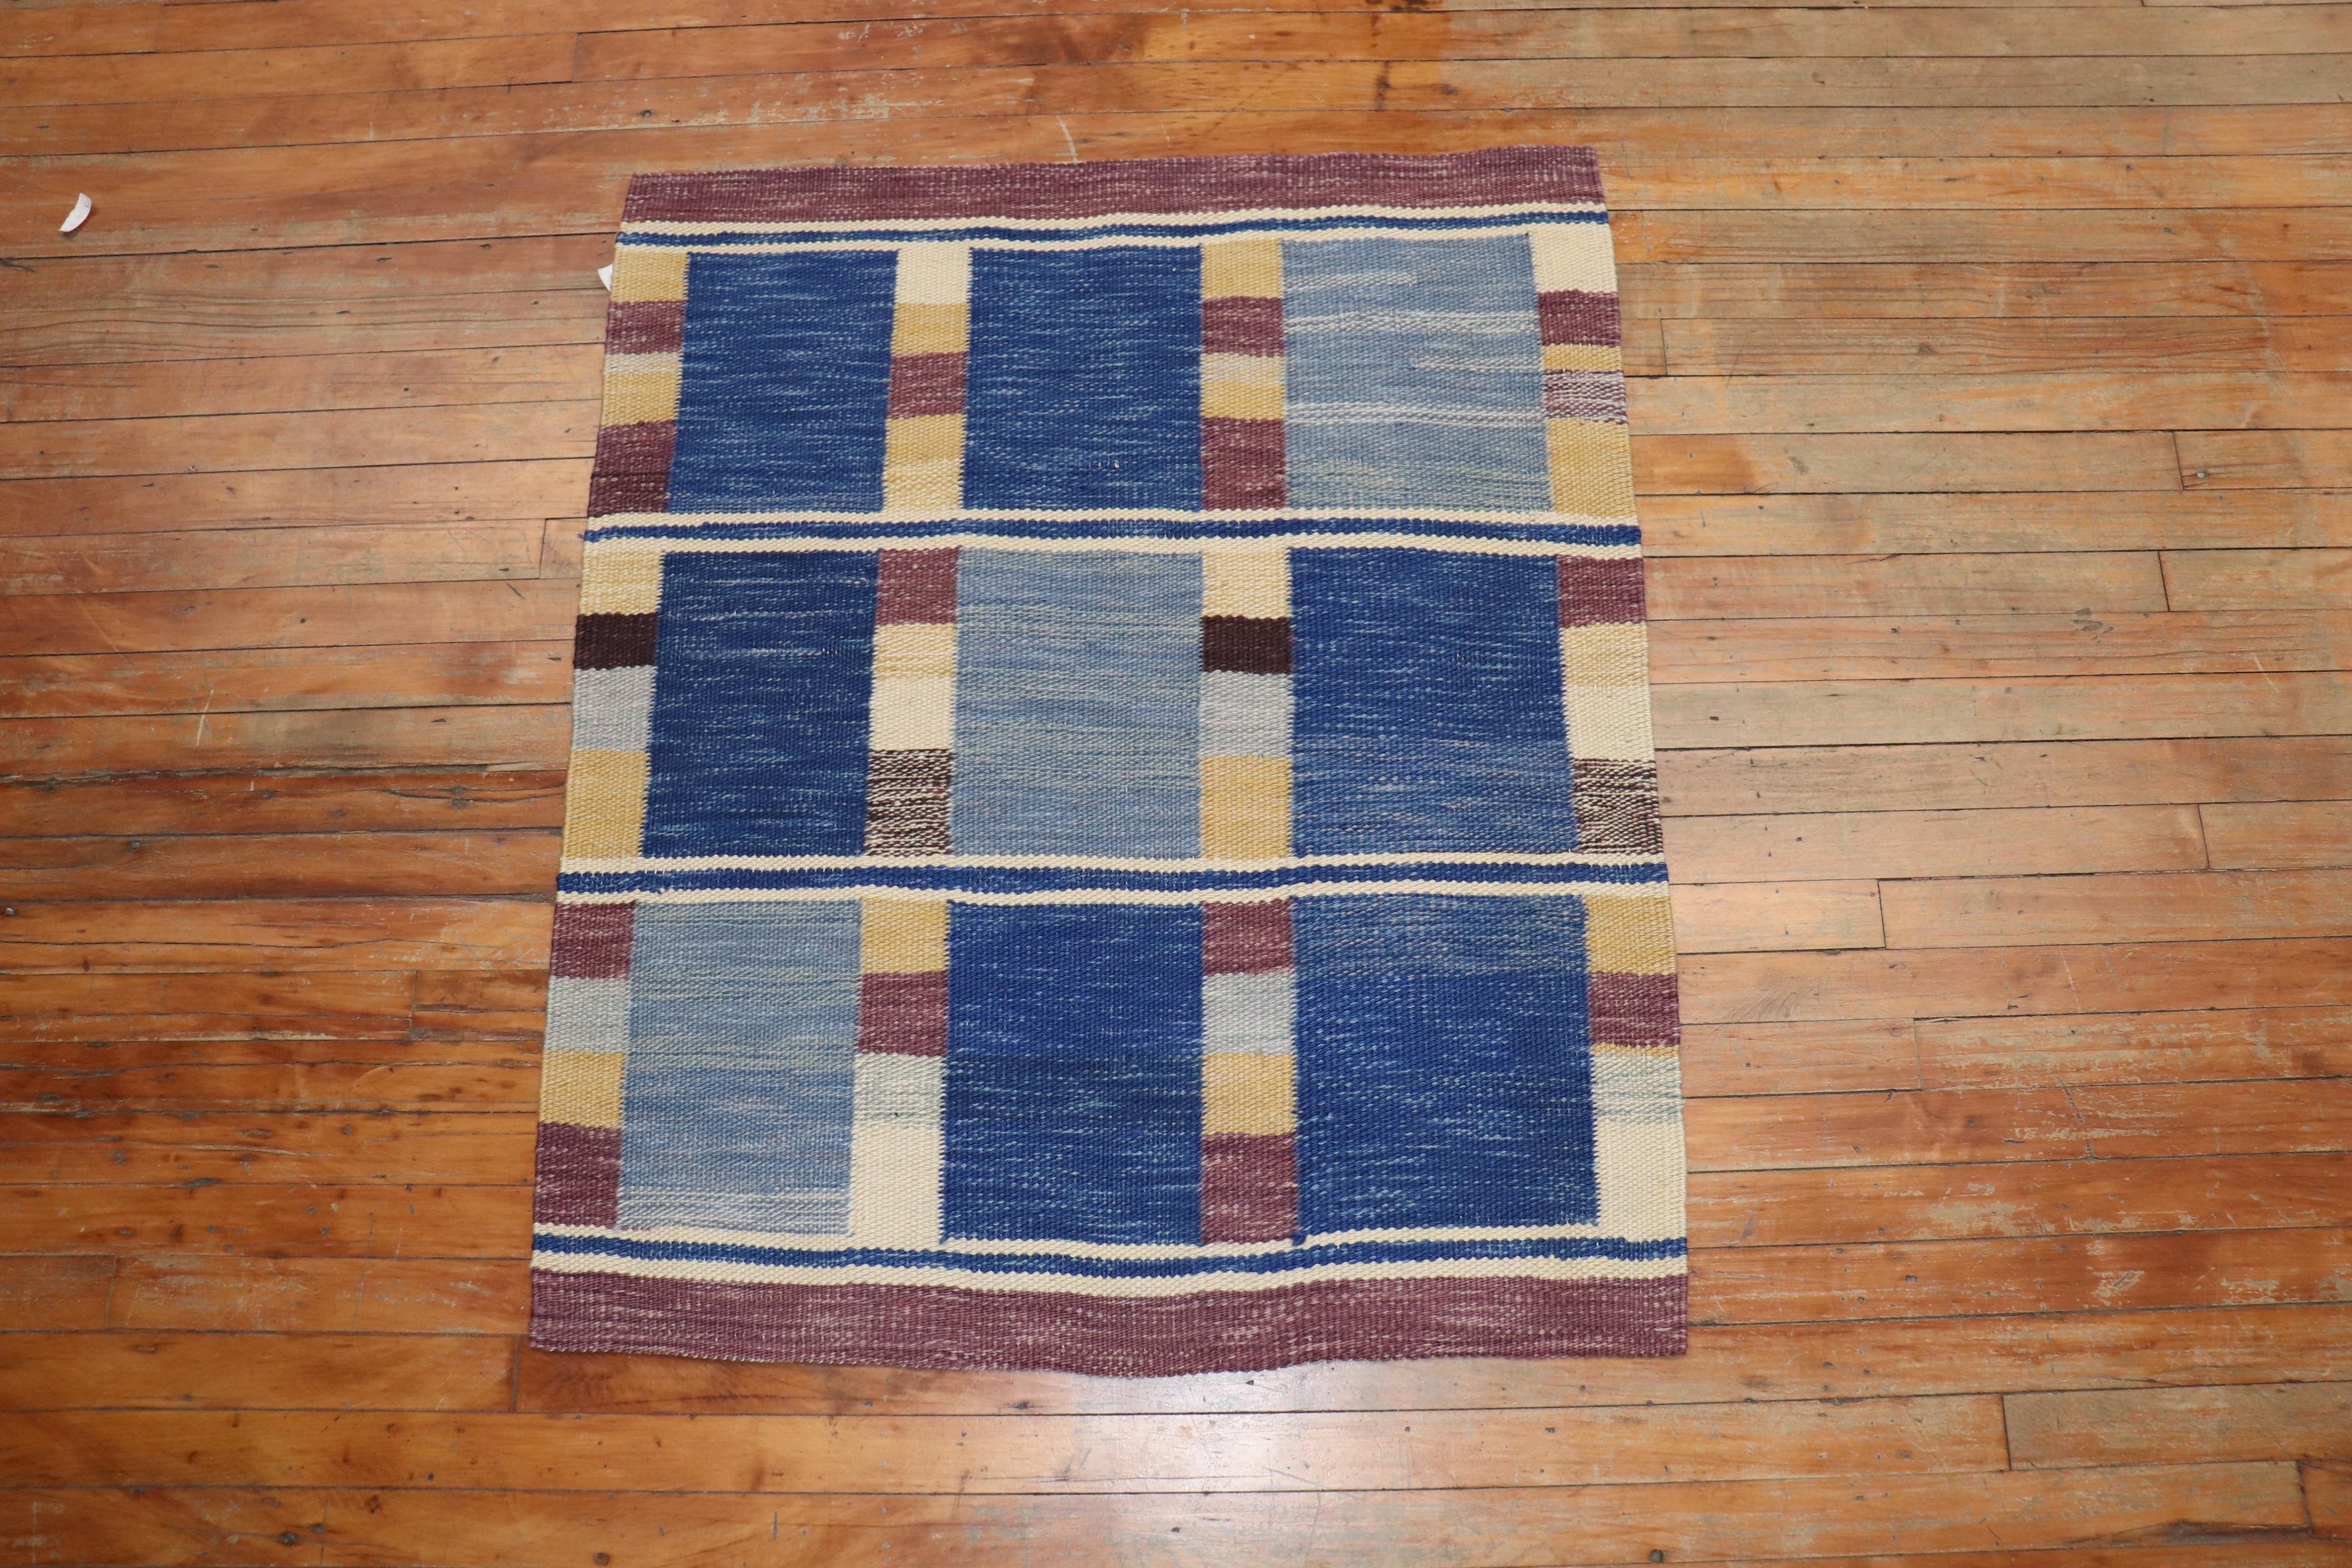 Scatter size one of a kind mid-20th century Scandinavian Kilim

Measures: 3' x 3'7